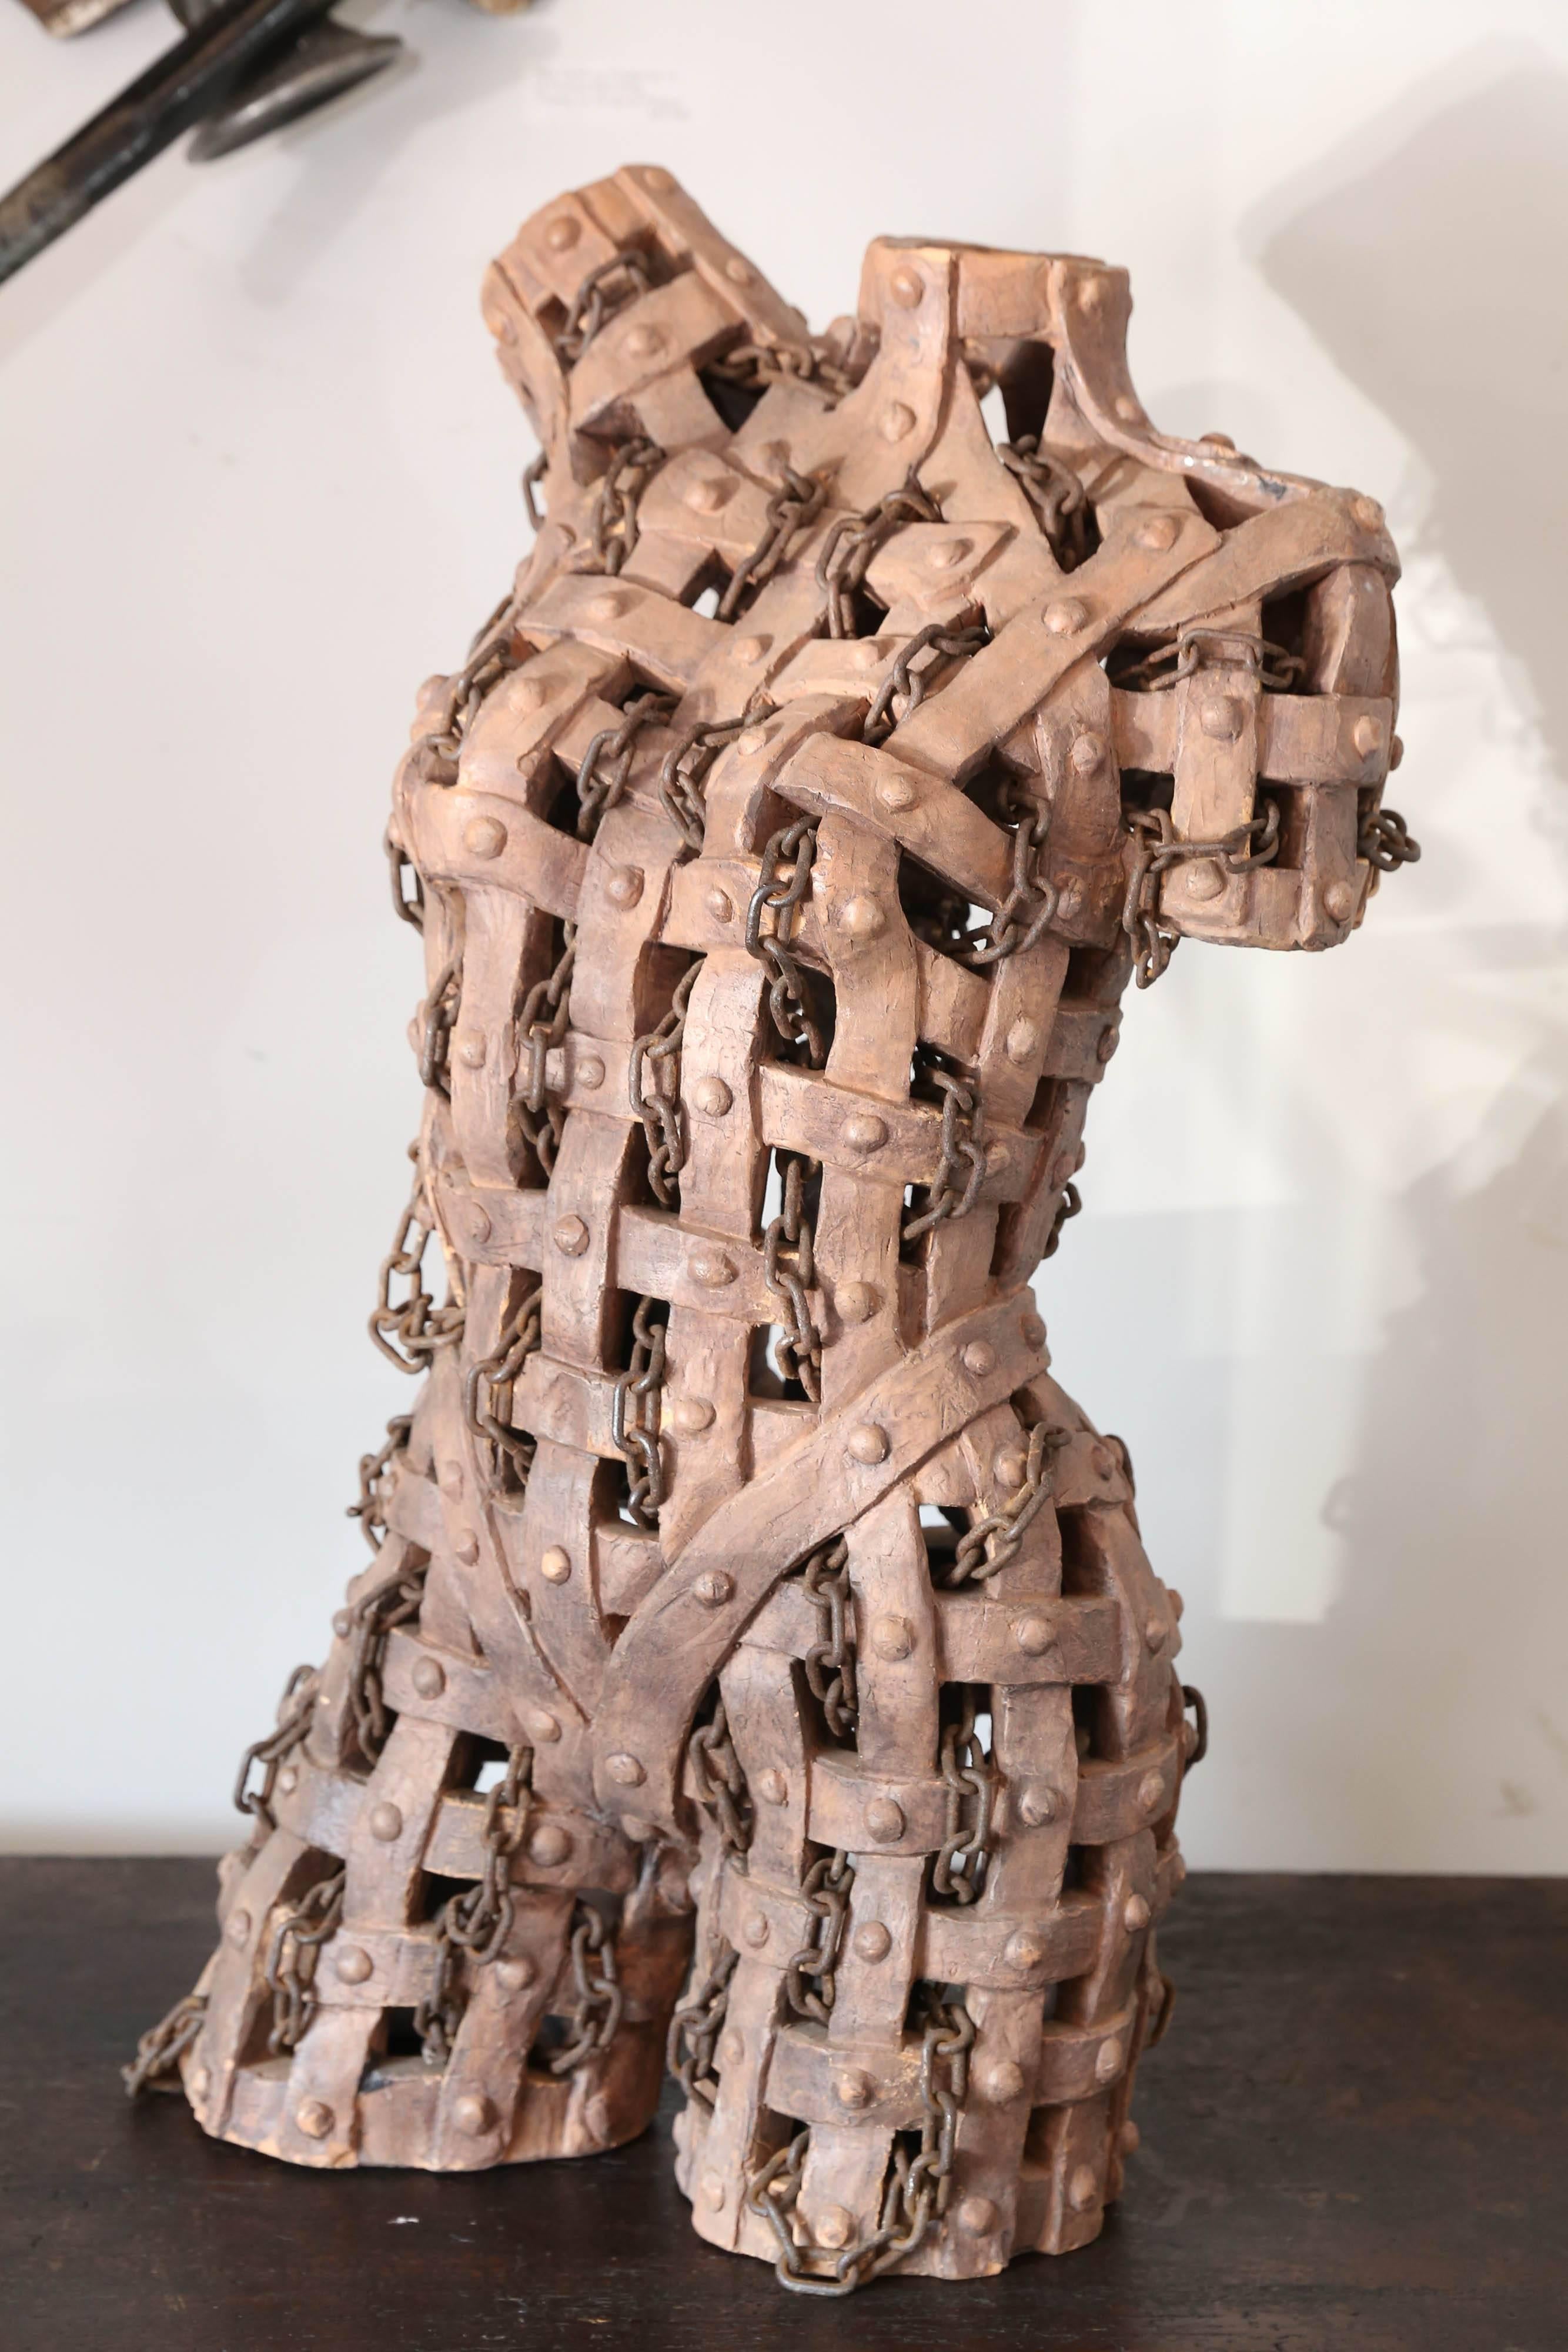 This striking feminine sculpture known as the 